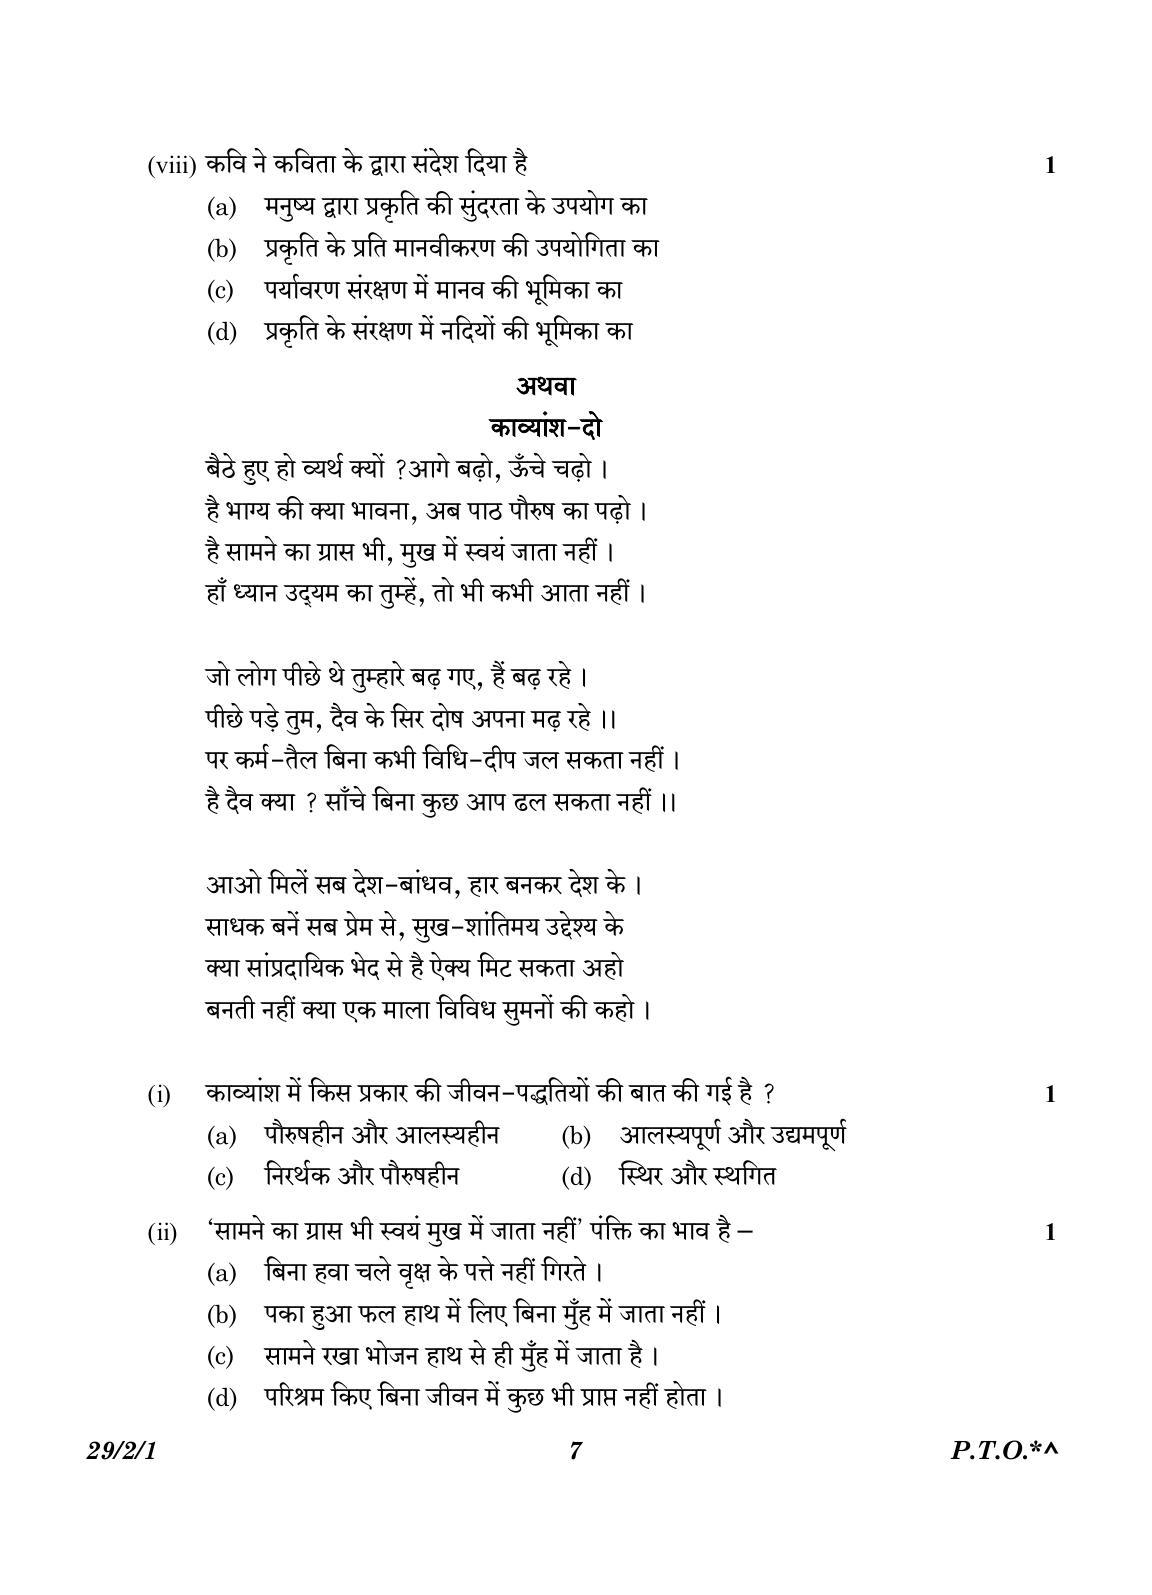 CBSE Class 12 29-2-1 Hindi Elective 2023 Question Paper - Page 7